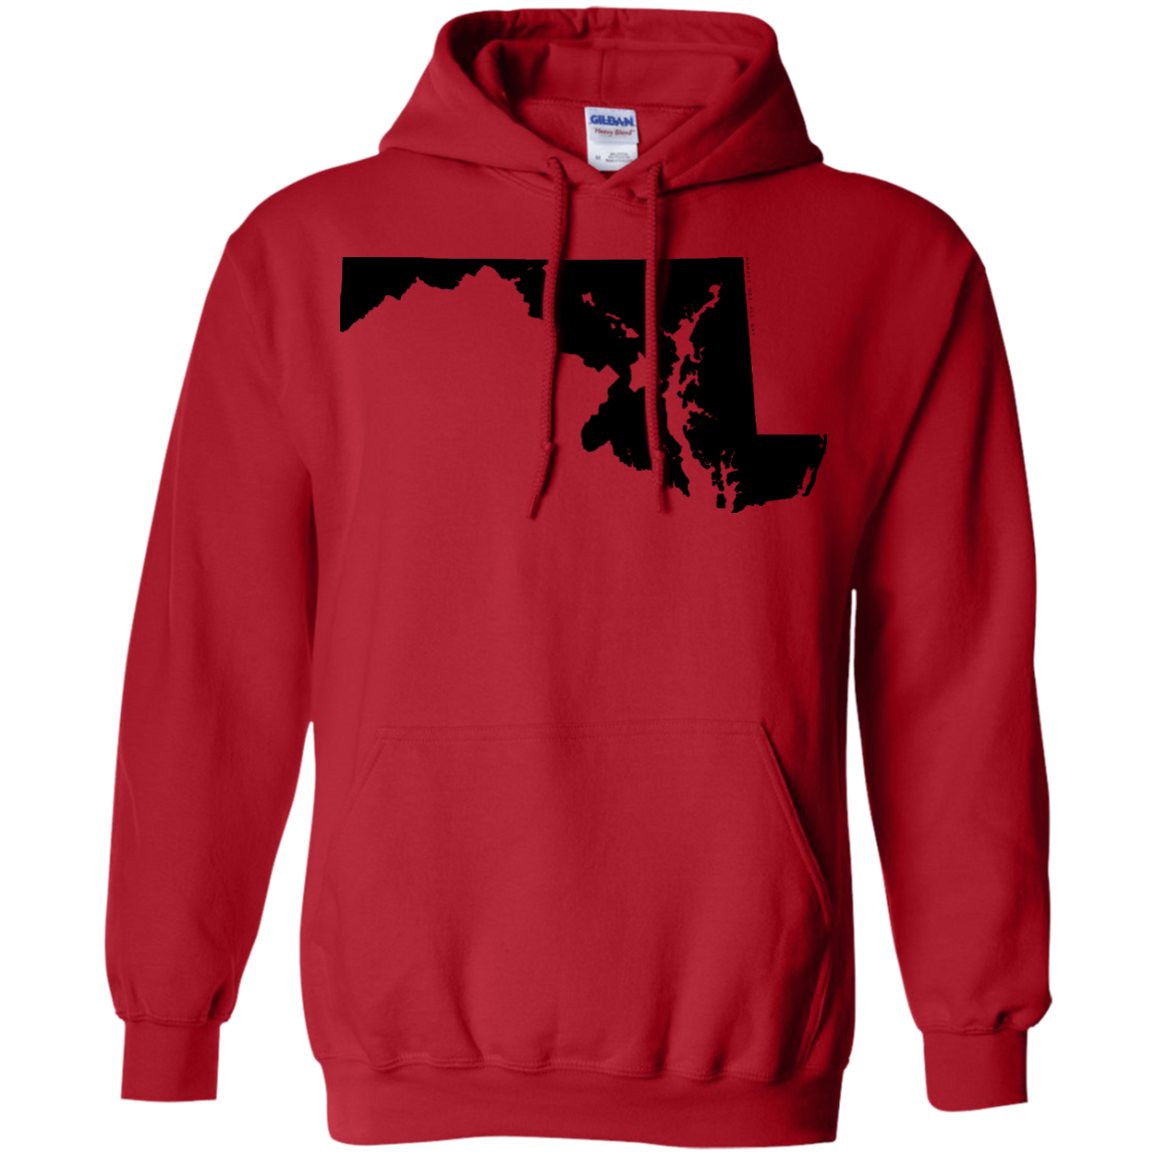 Living in Maryland with Hawaii Roots Pullover Hoodie 8 oz., Sweatshirts, Hawaii Nei All Day